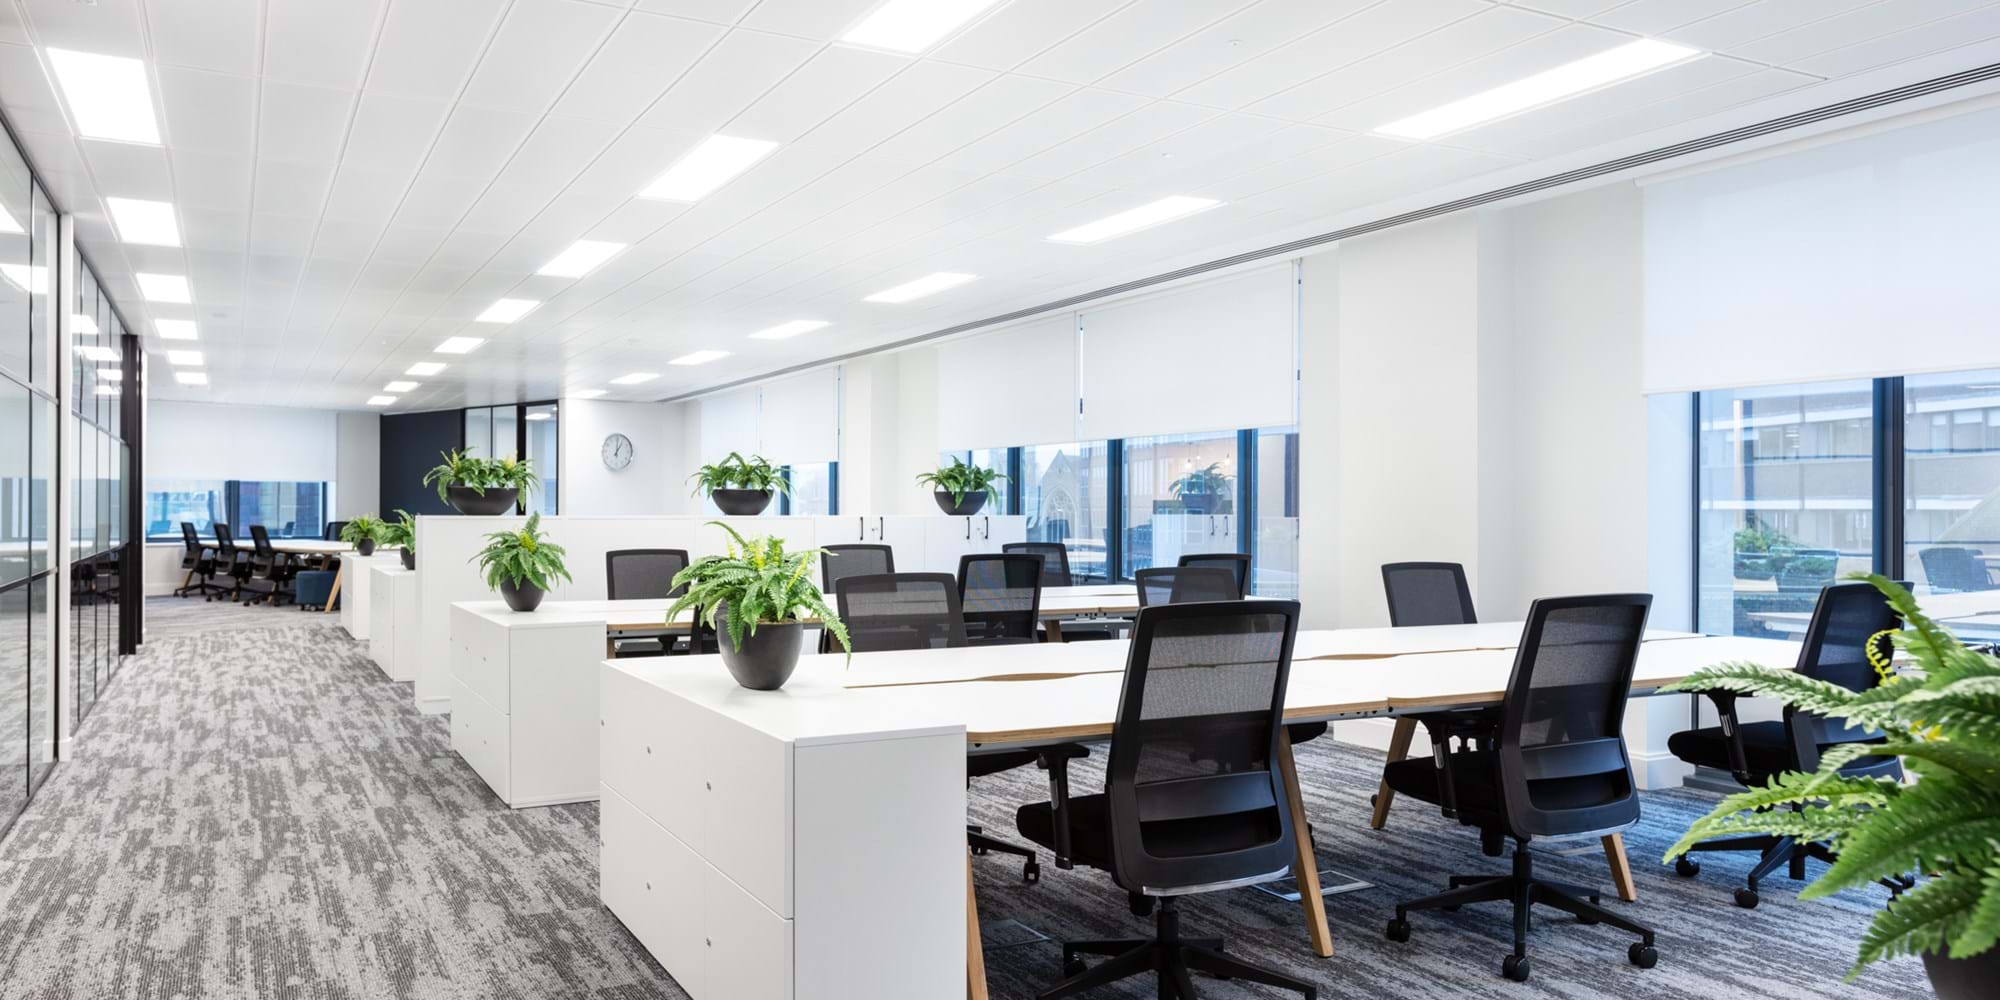 Modus Workspace office design, fit out and refurbishment - Pivot - Guildford - Pivot_Guildford_161220-1.jpg